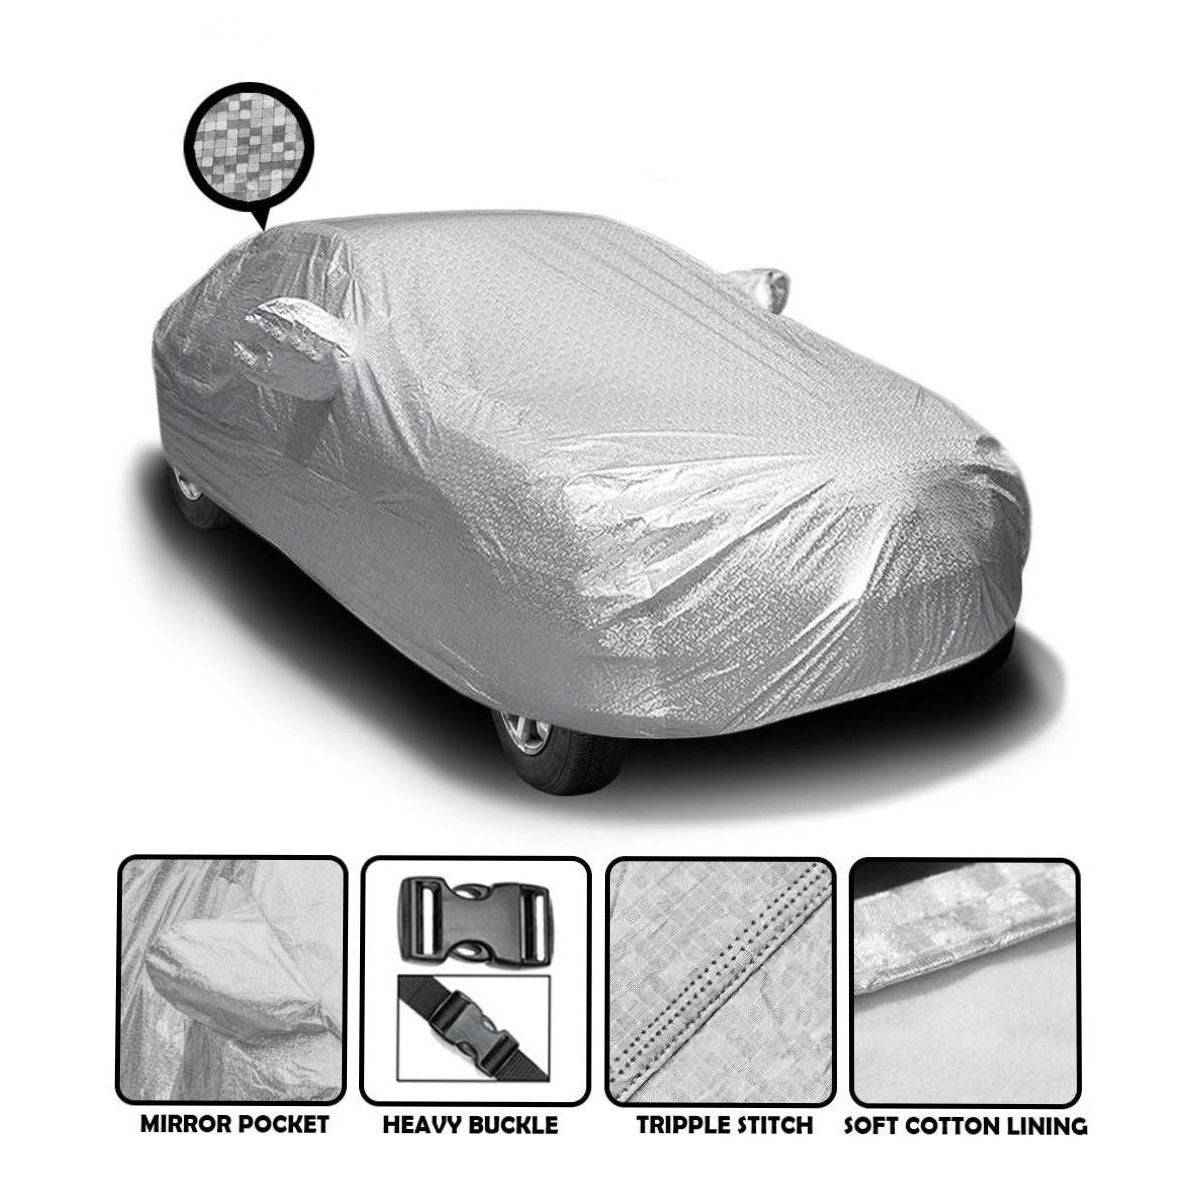 Oshotto Spyro Silver Anti Reflective, dustproof and Water Proof Car Body Cover with Mirror Pockets For Mercedes Benz GLC